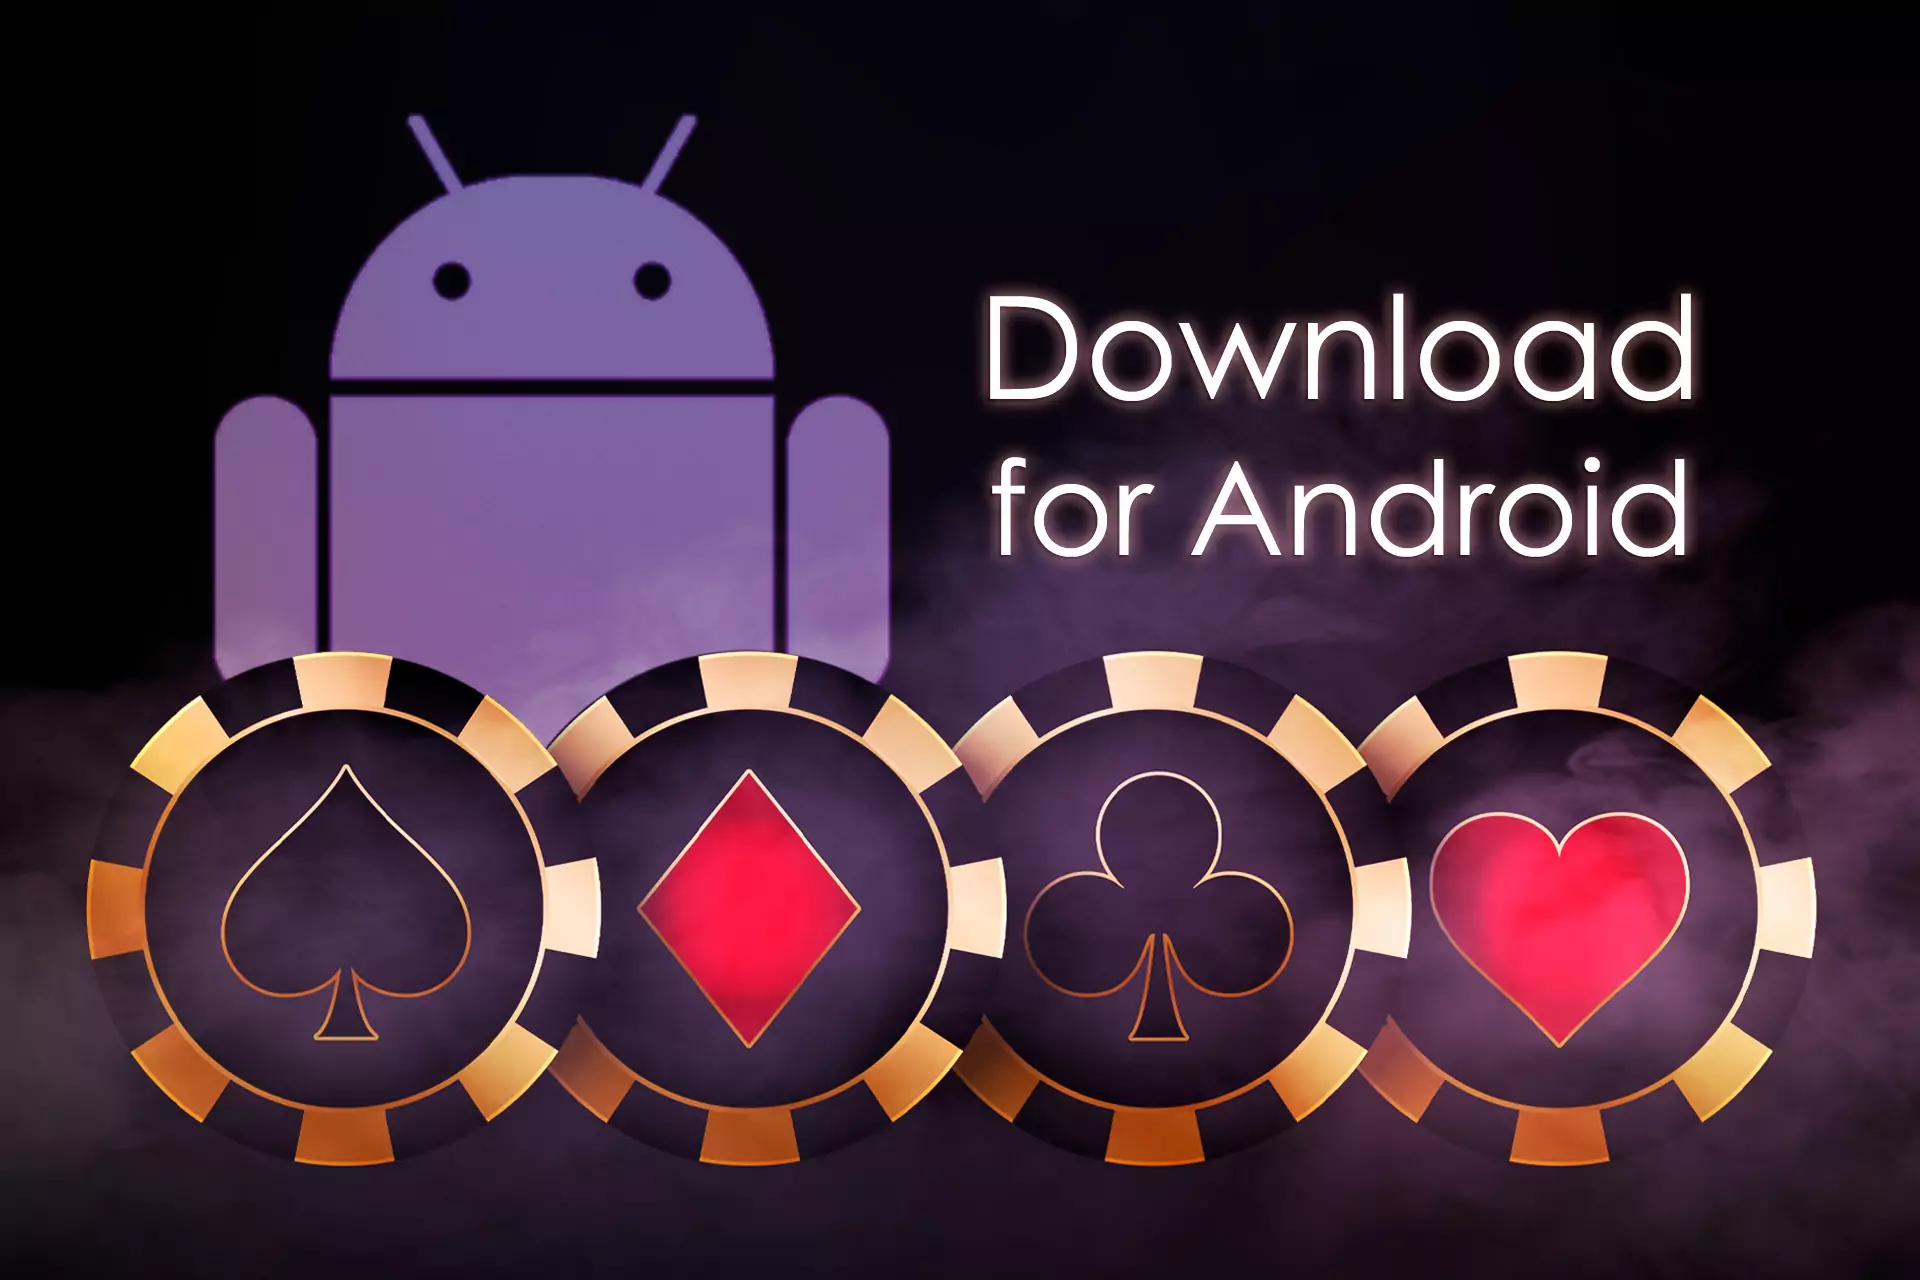 The app for Android you can download from the official website going out our link.